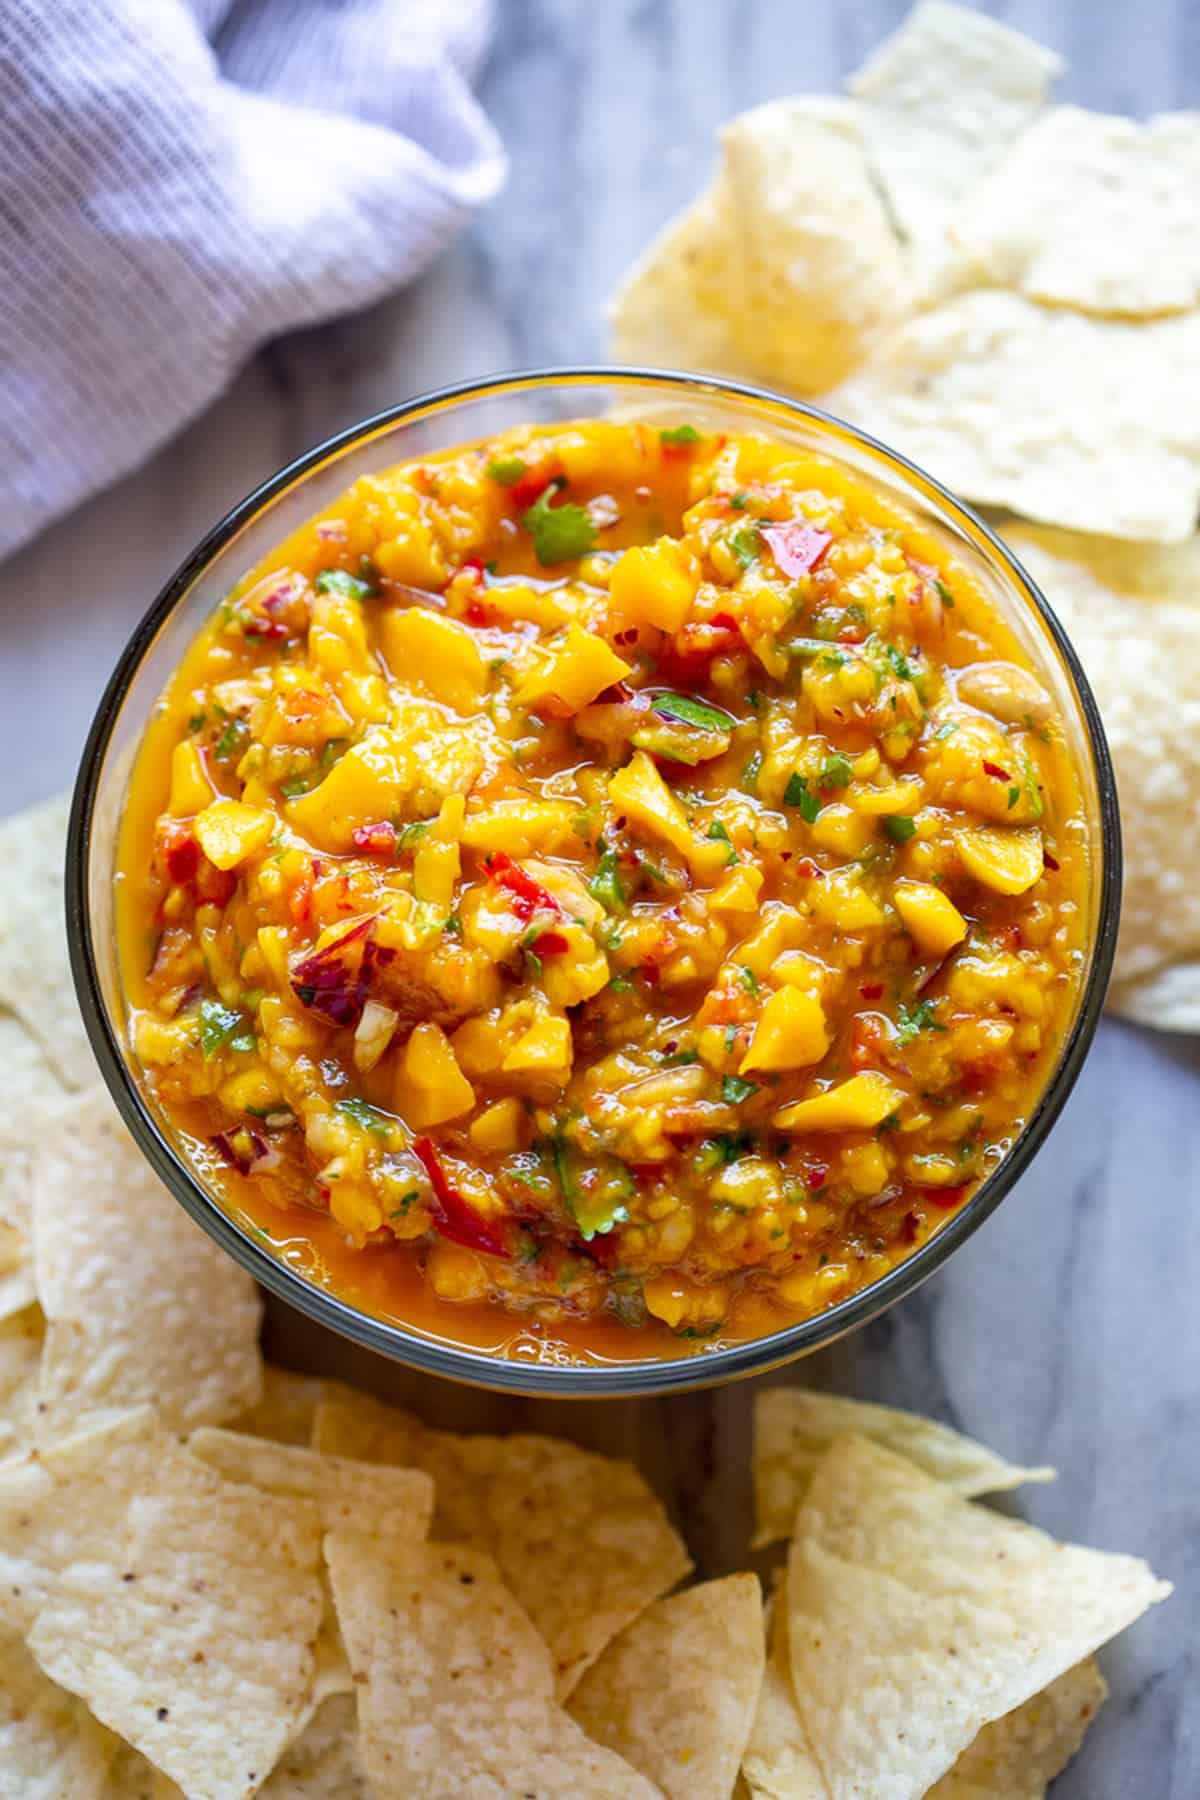 A bowl of Mango Salsa, ready to be enjoyed with chips or on tacos.